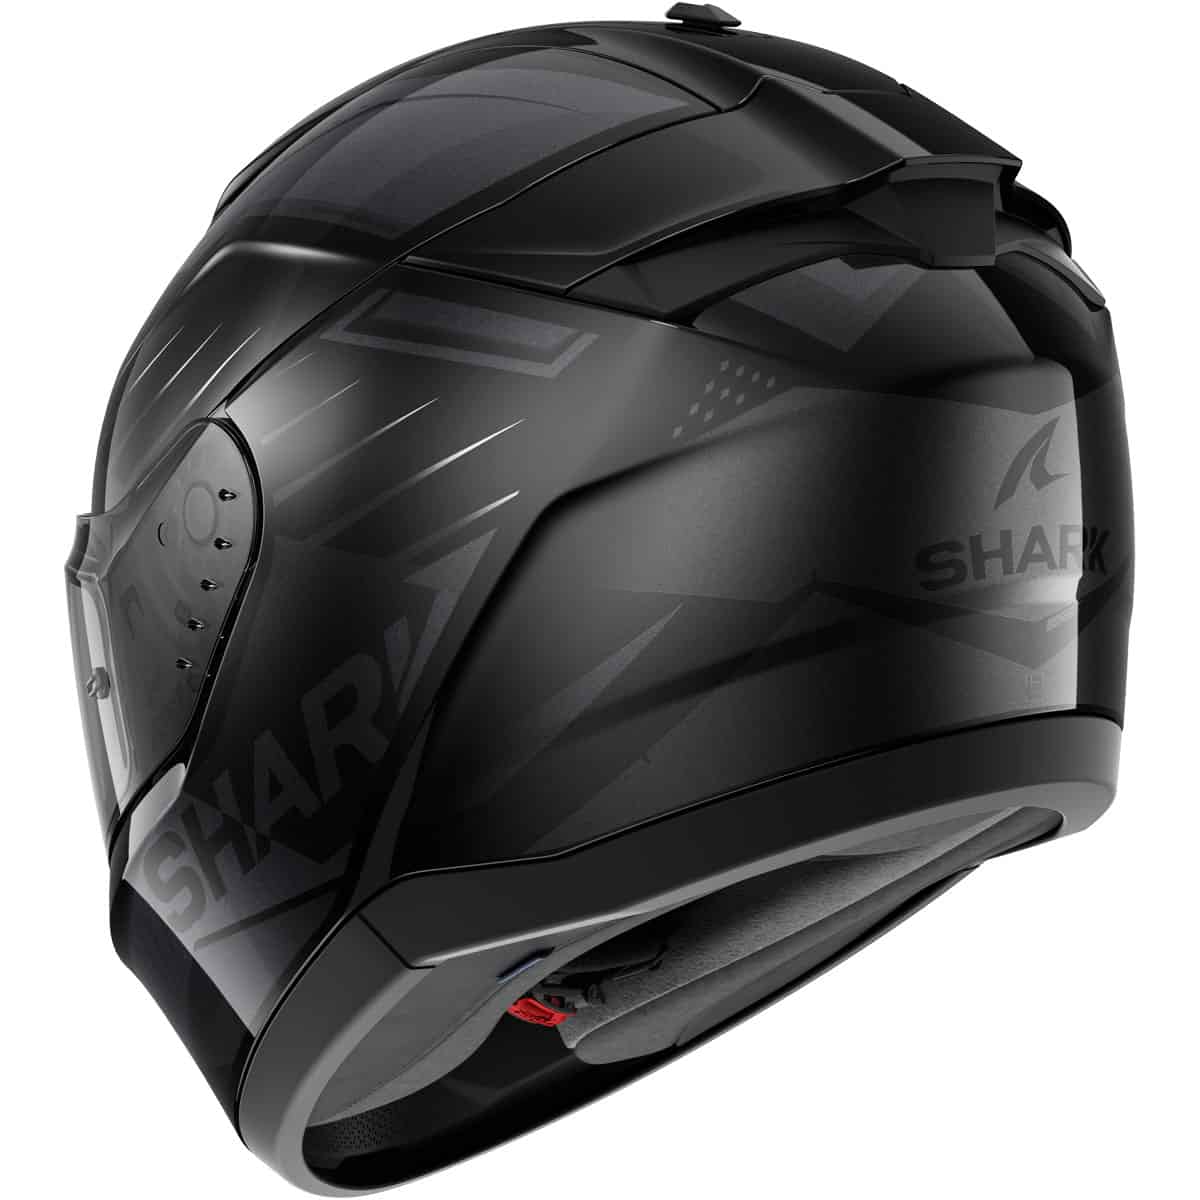 The Shark Ridill 2 helmet offers the perfect streetwear style with a comfortable and secure fit. Featuring unique design elements such as air inlets